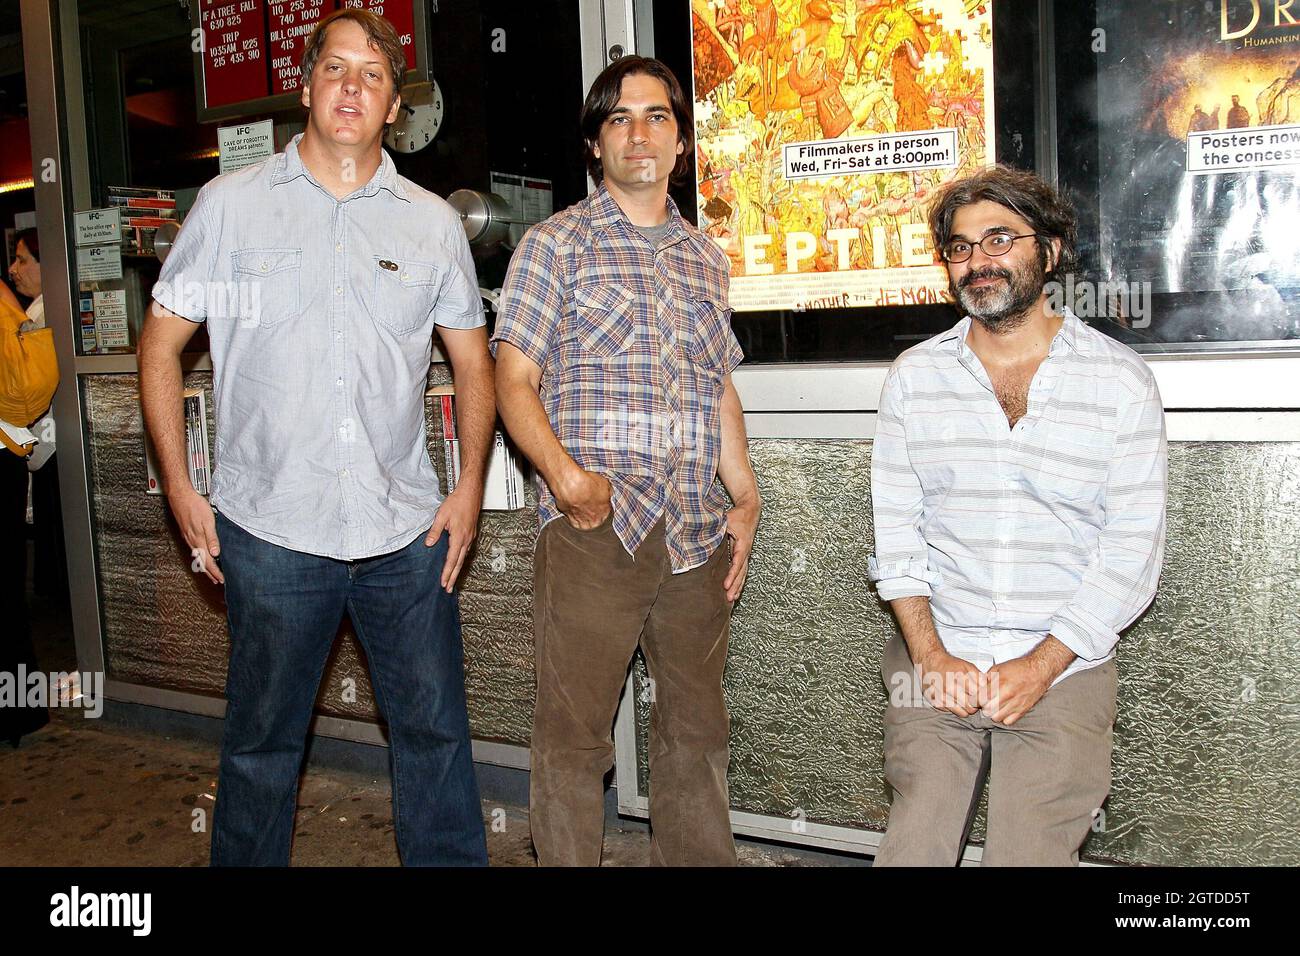 New York, NY, USA. 6 July, 2011. Jim Wellingham, director/writer, Michael Tully, artist, Onur Turkel at the 'Septien' premiere at the IFC Center. Credit: Steve Mack/Alamy Stock Photo